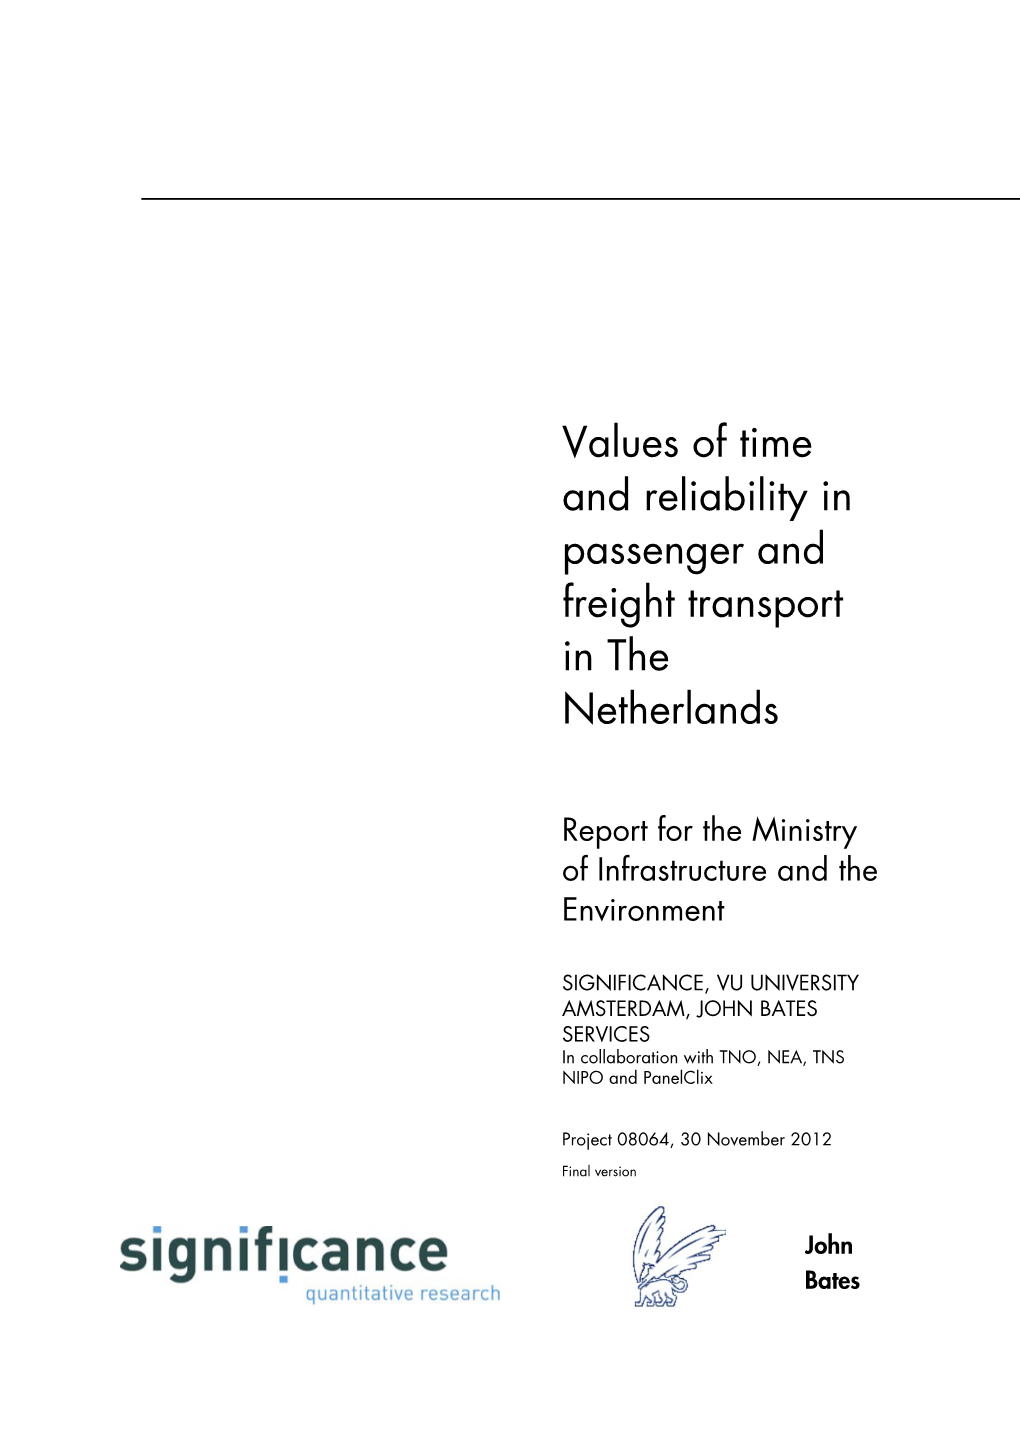 Values of Time and Reliability in Passenger and Freight Transport in the Netherlands